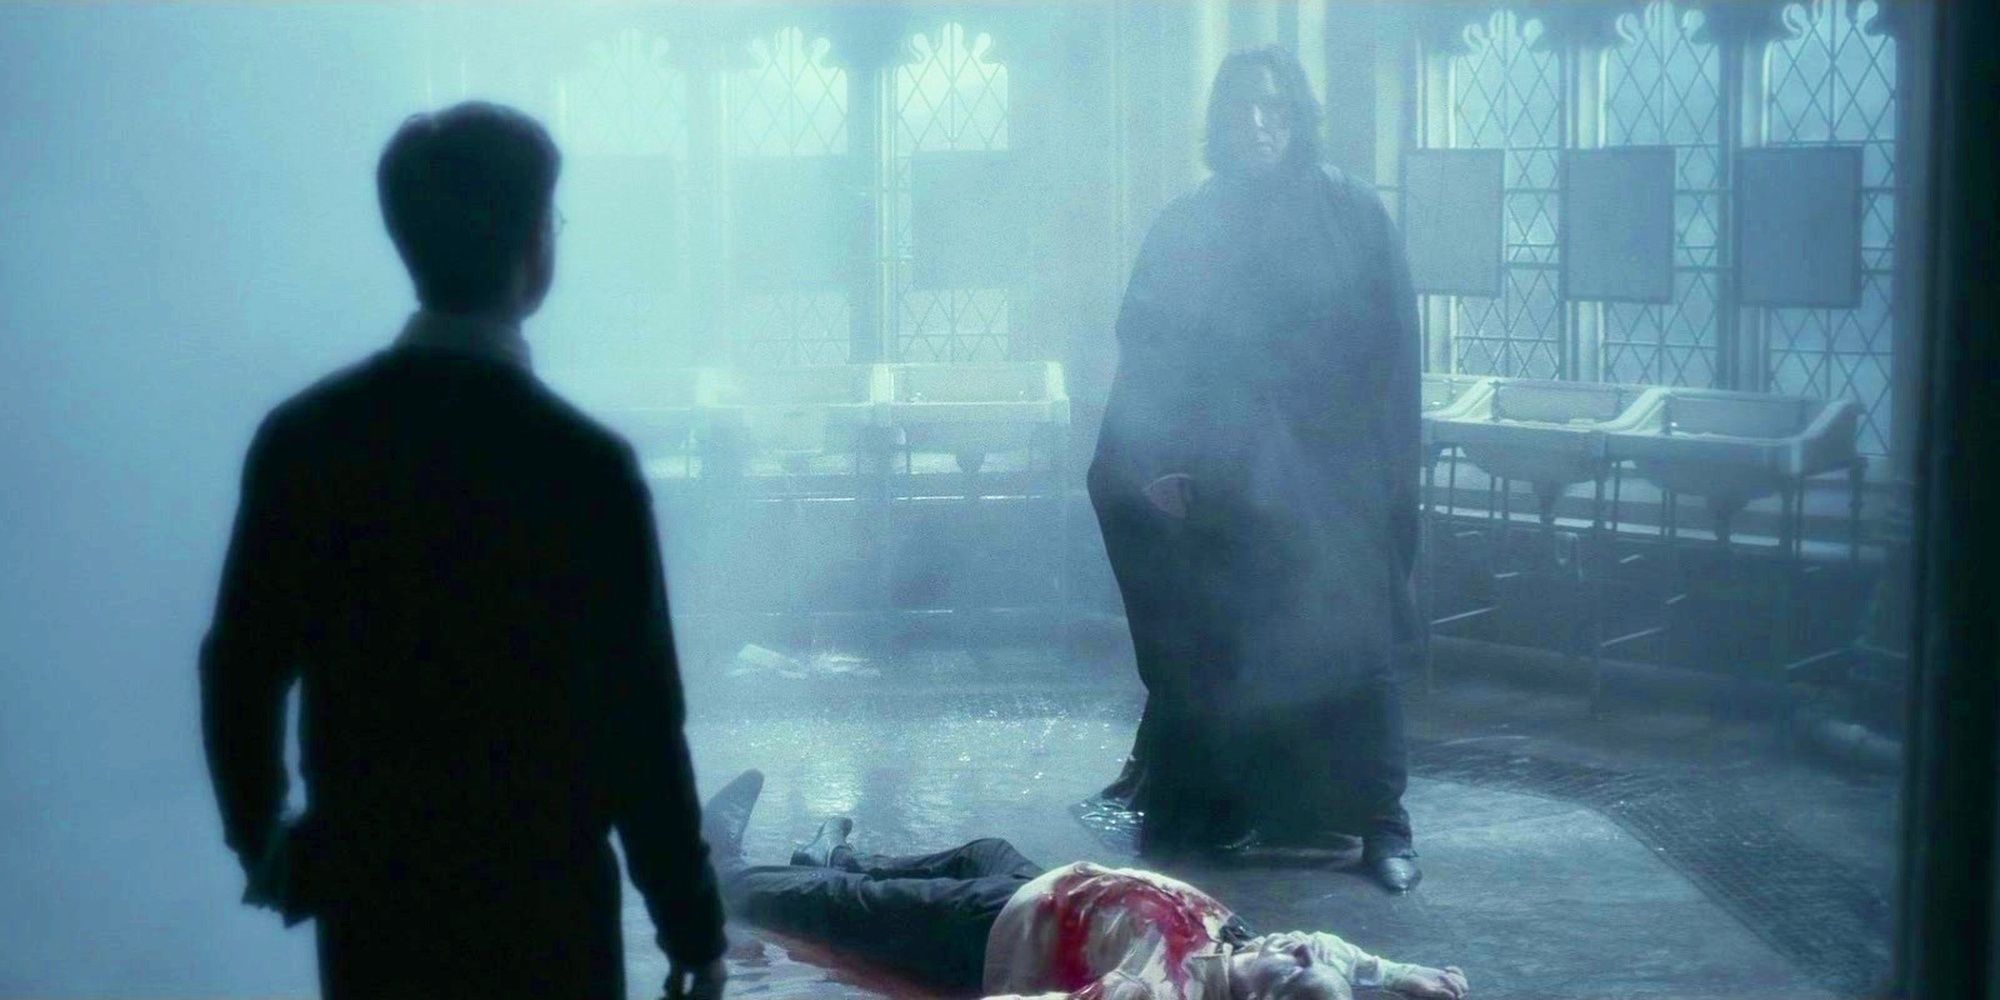 Snape discovers that Harry has injured Draco using Sectumsempra